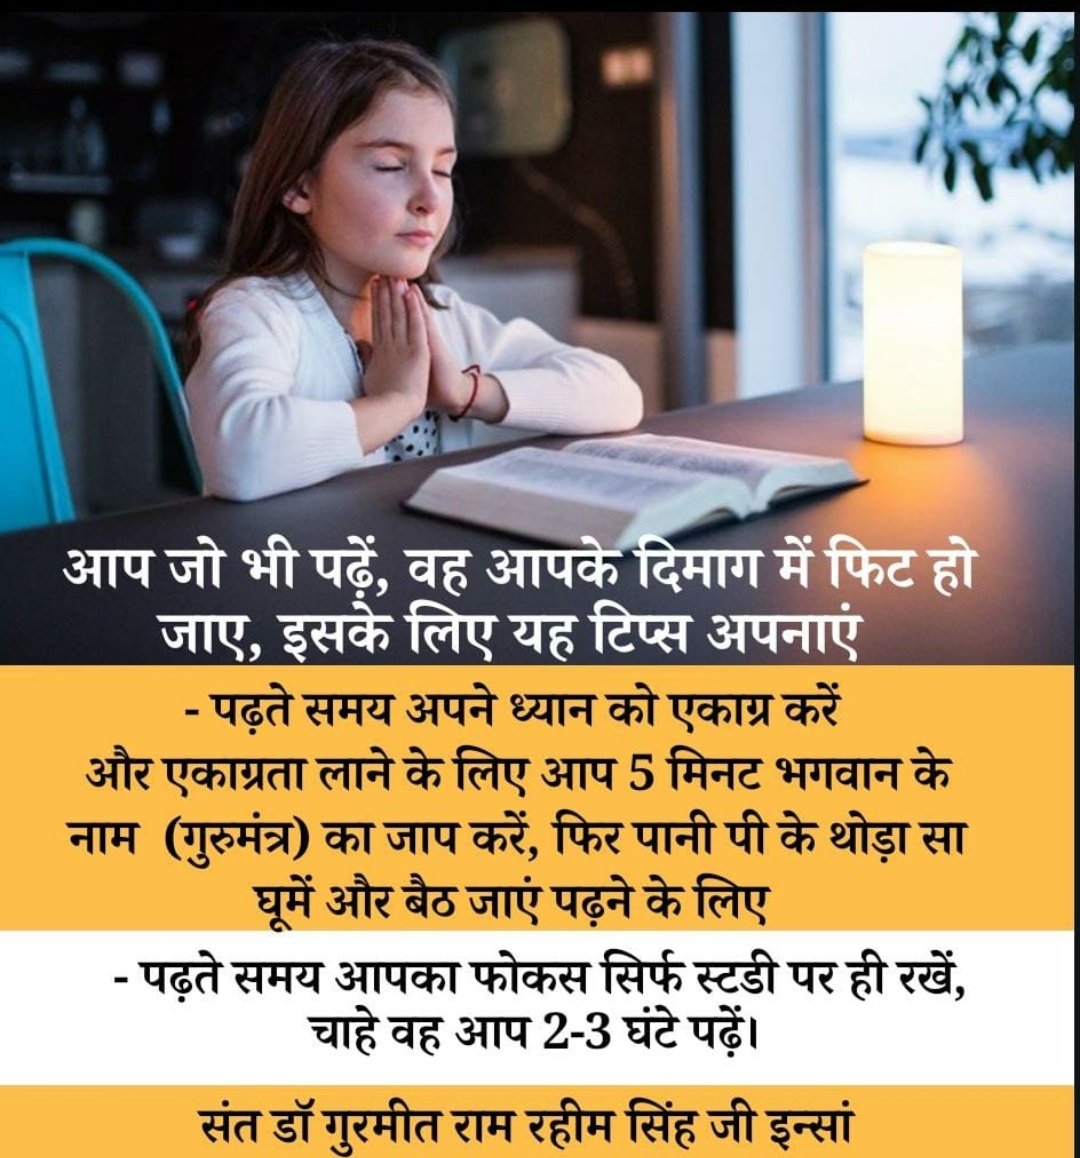 Morning time is the best time to study. What you read in the morning gets fit in the memory very quickly. Saint Gurmeet Ram Rahim ji has given many more such study tips.

#BestTimeForStudy
#BestStudyTips #StudyTips
#HowToLearnFast #ProvenStudyTips
#DeraSachaSauda #DrMSG